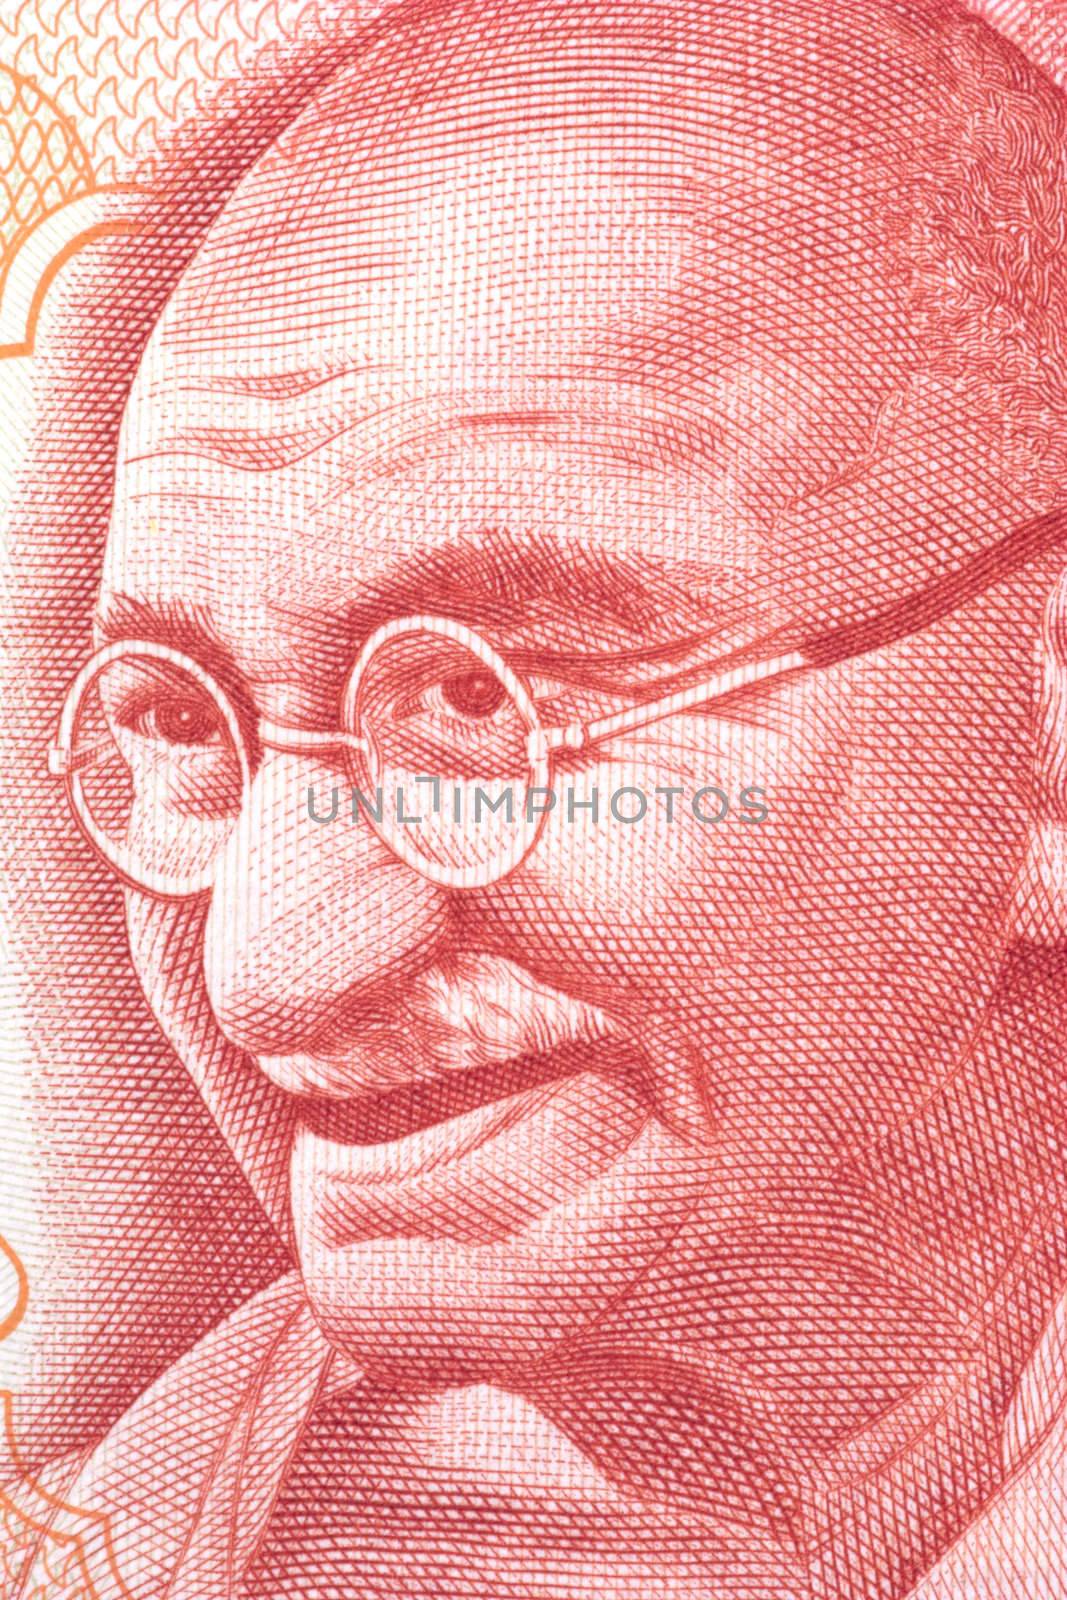 Mahatma Gandhi on Currency Note by shariffc